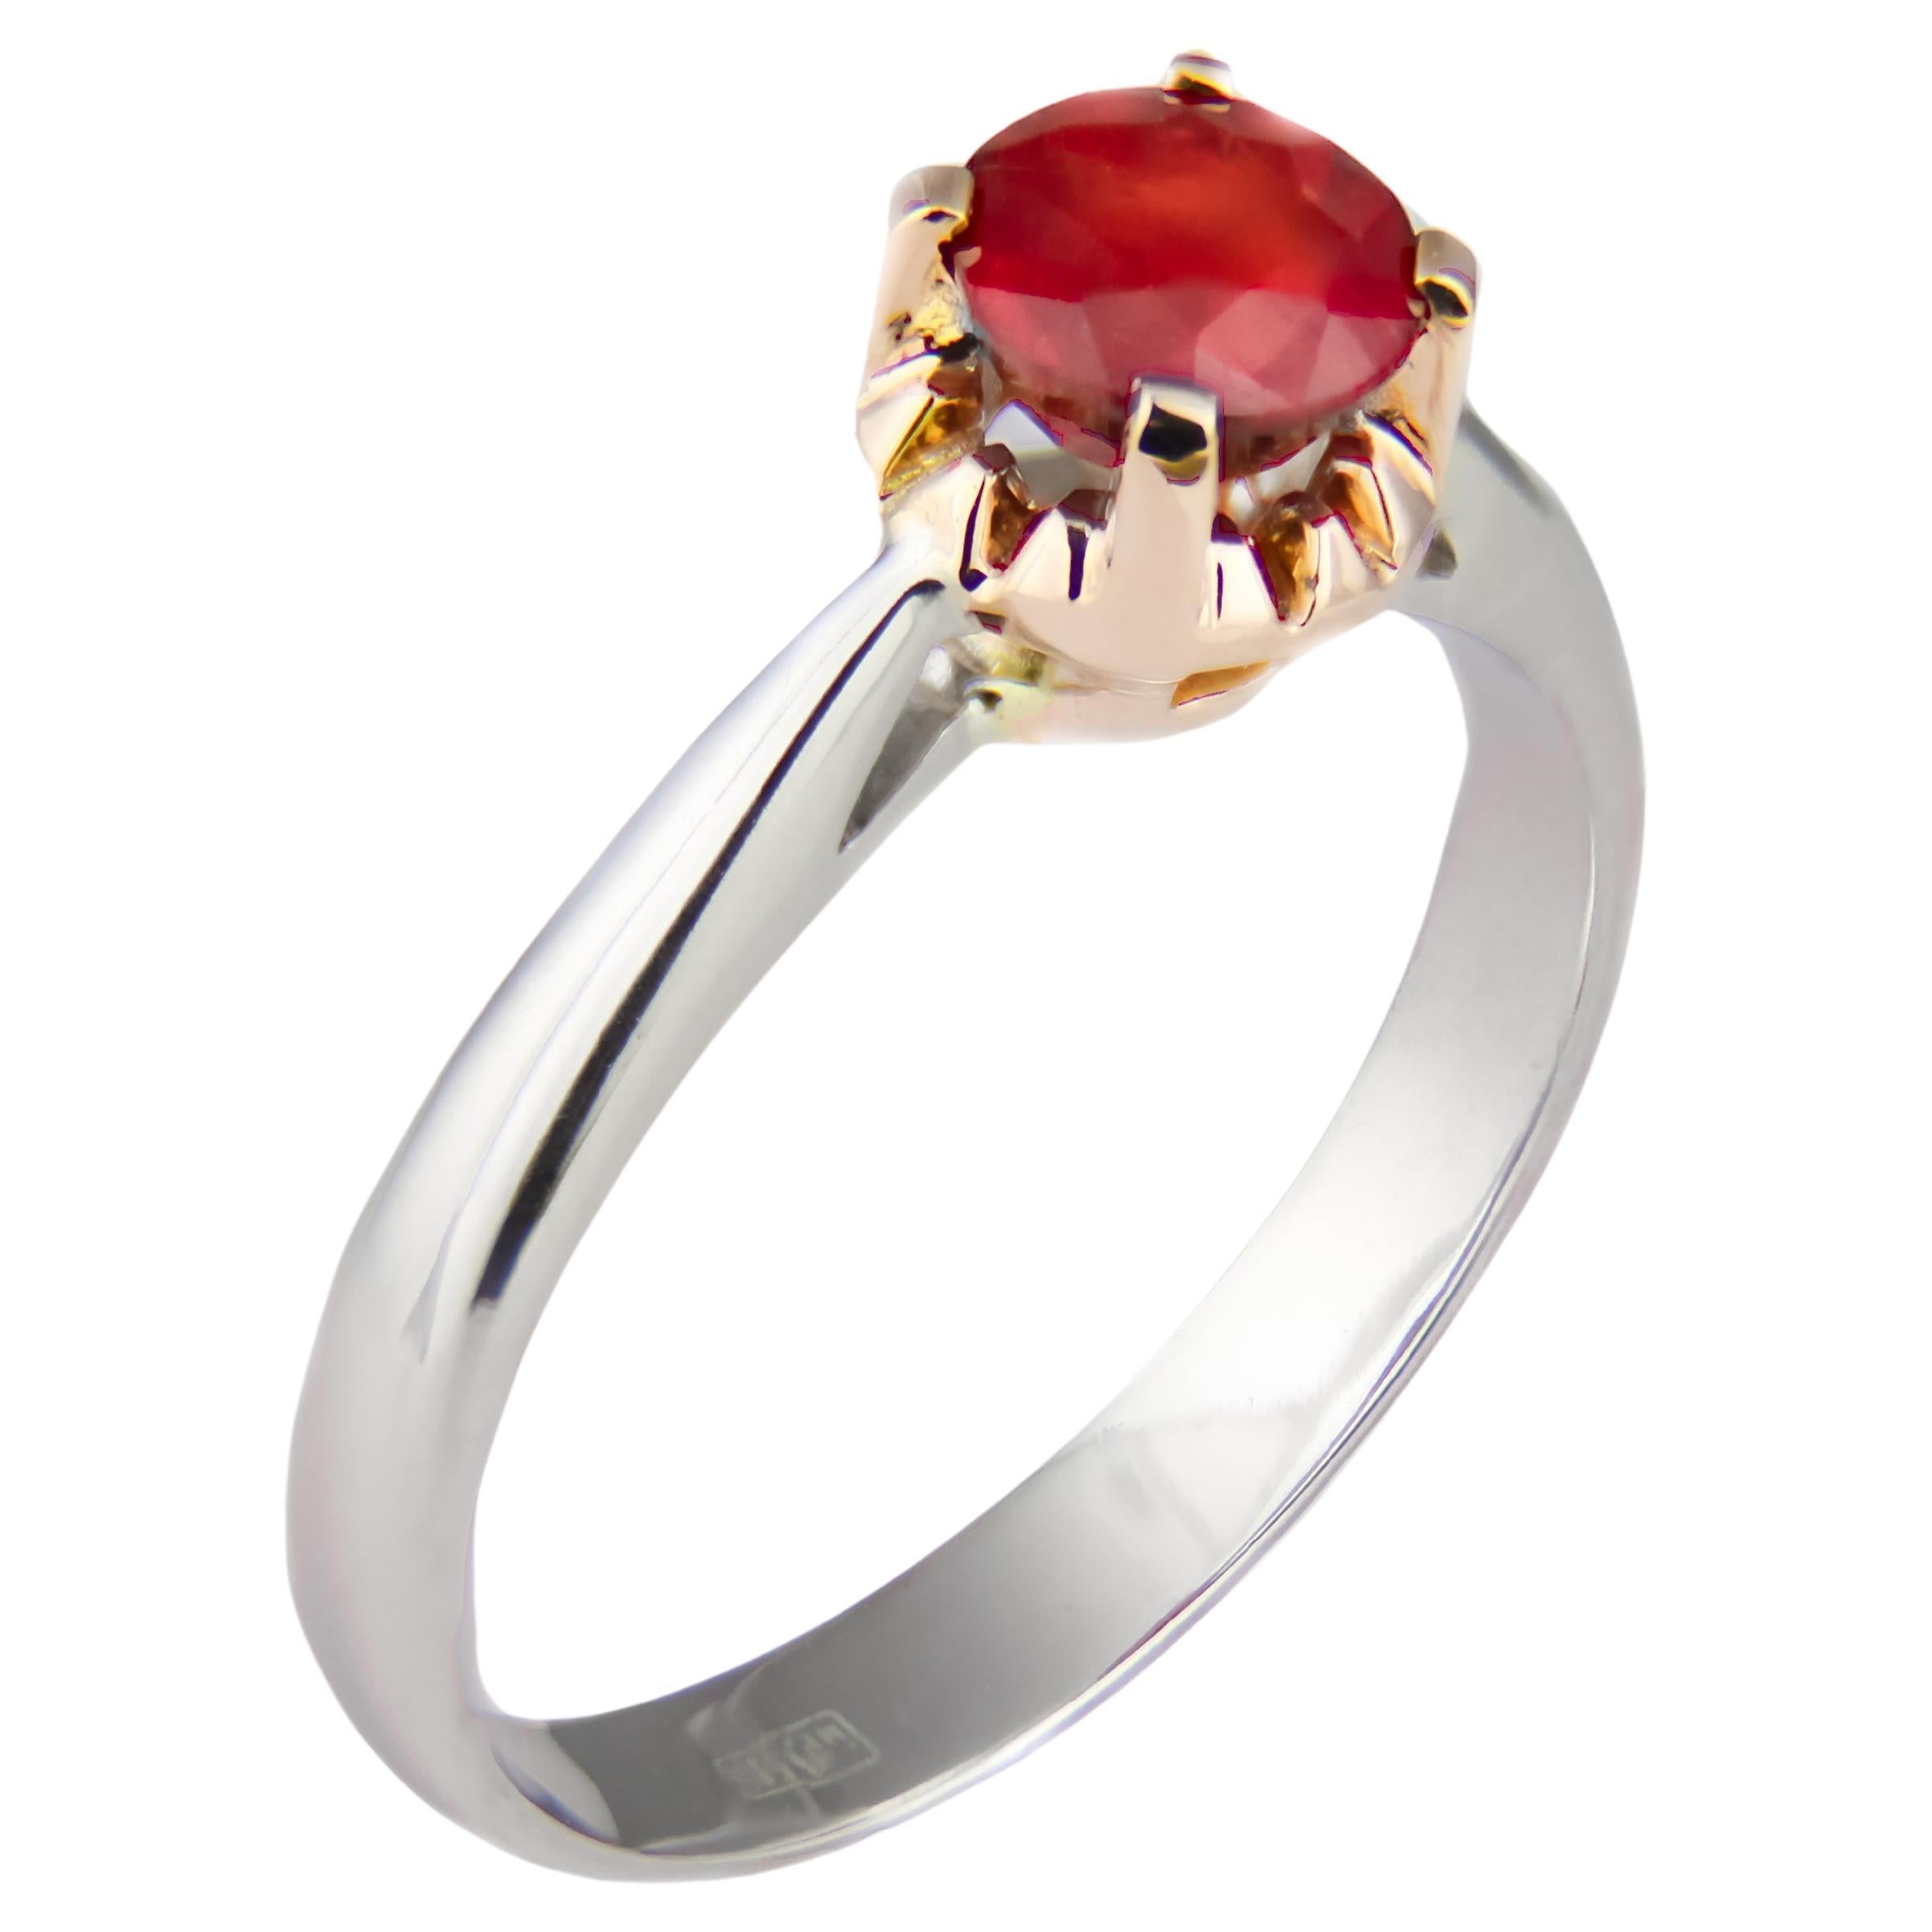 Ruby ring in 14k gold.  For Sale